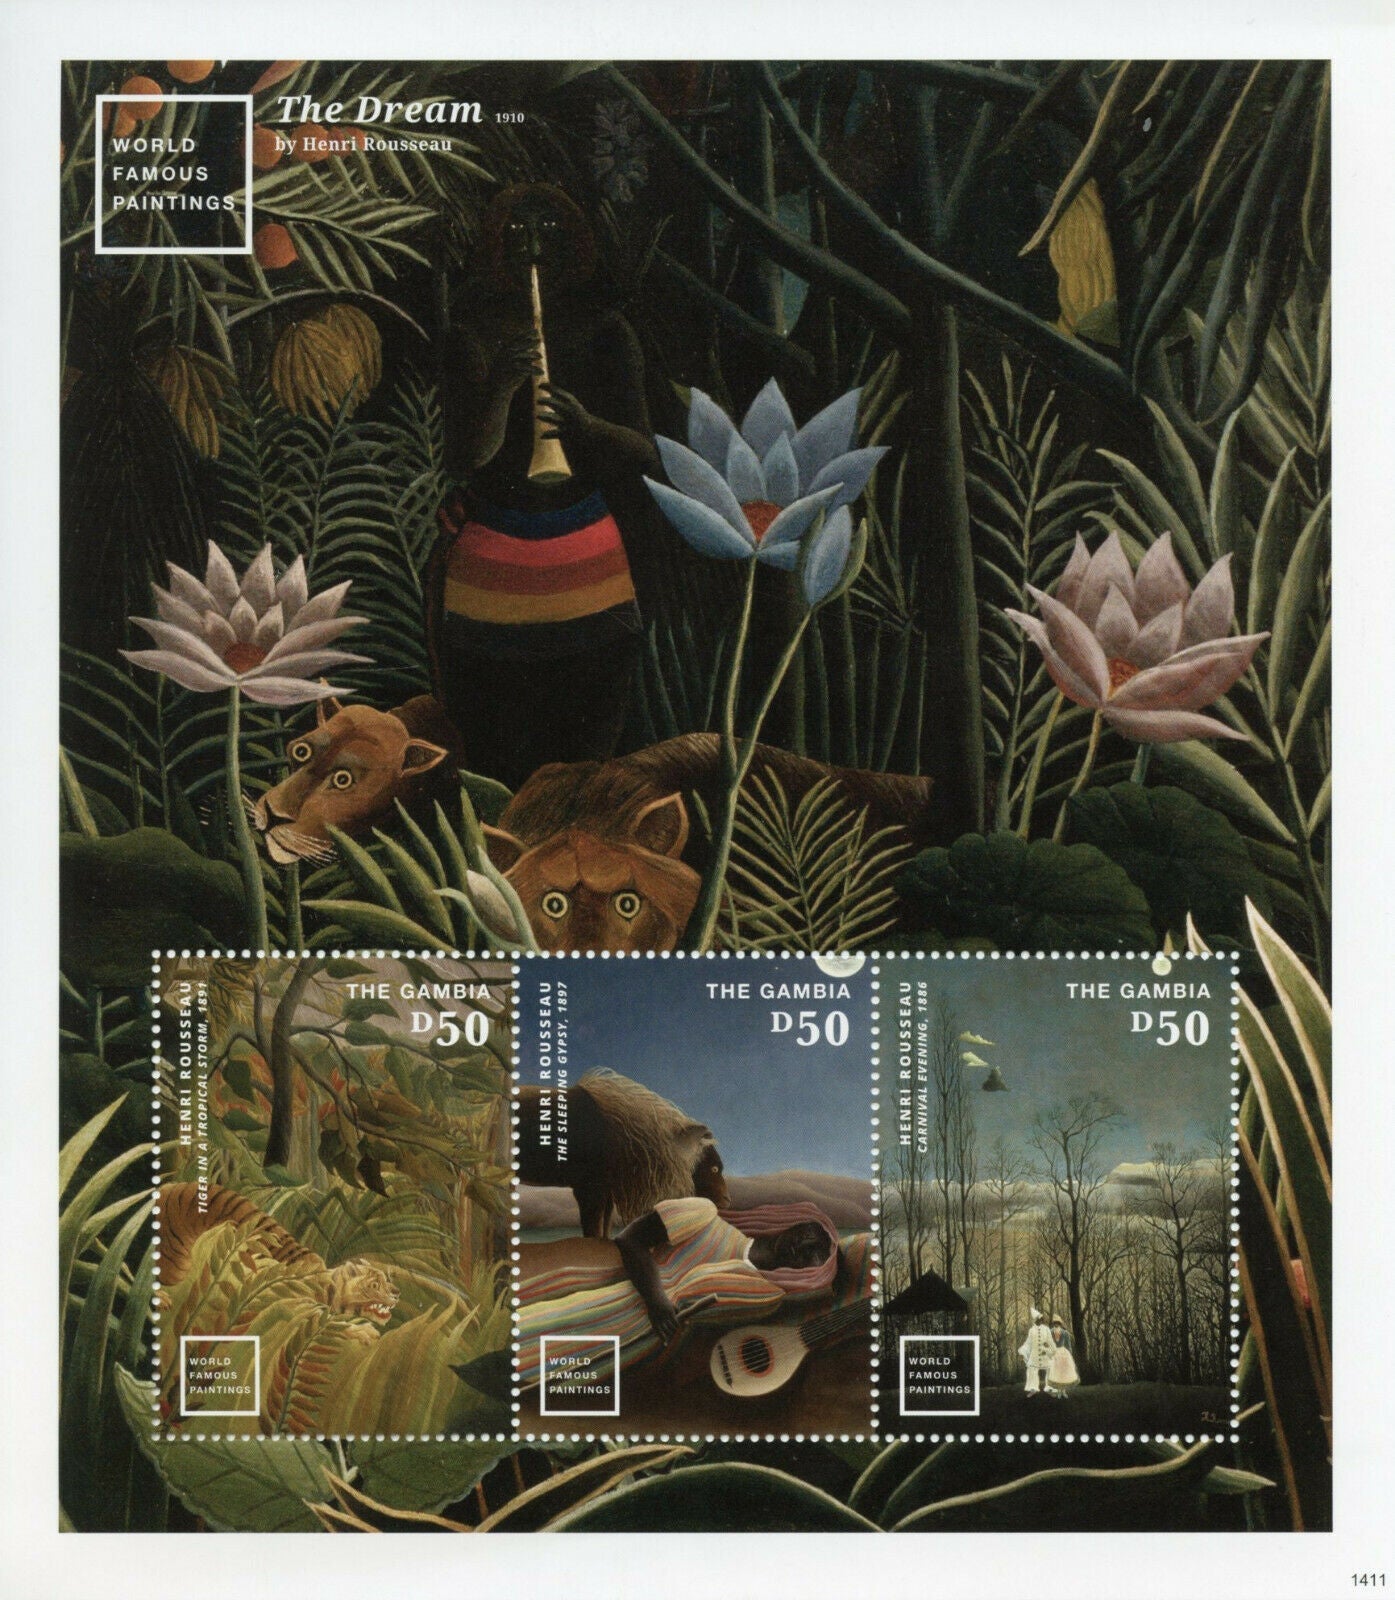 Gambia 2014 MNH Art Stamps World Famous Paintings Henri Rousseau Dream 3v M/S I